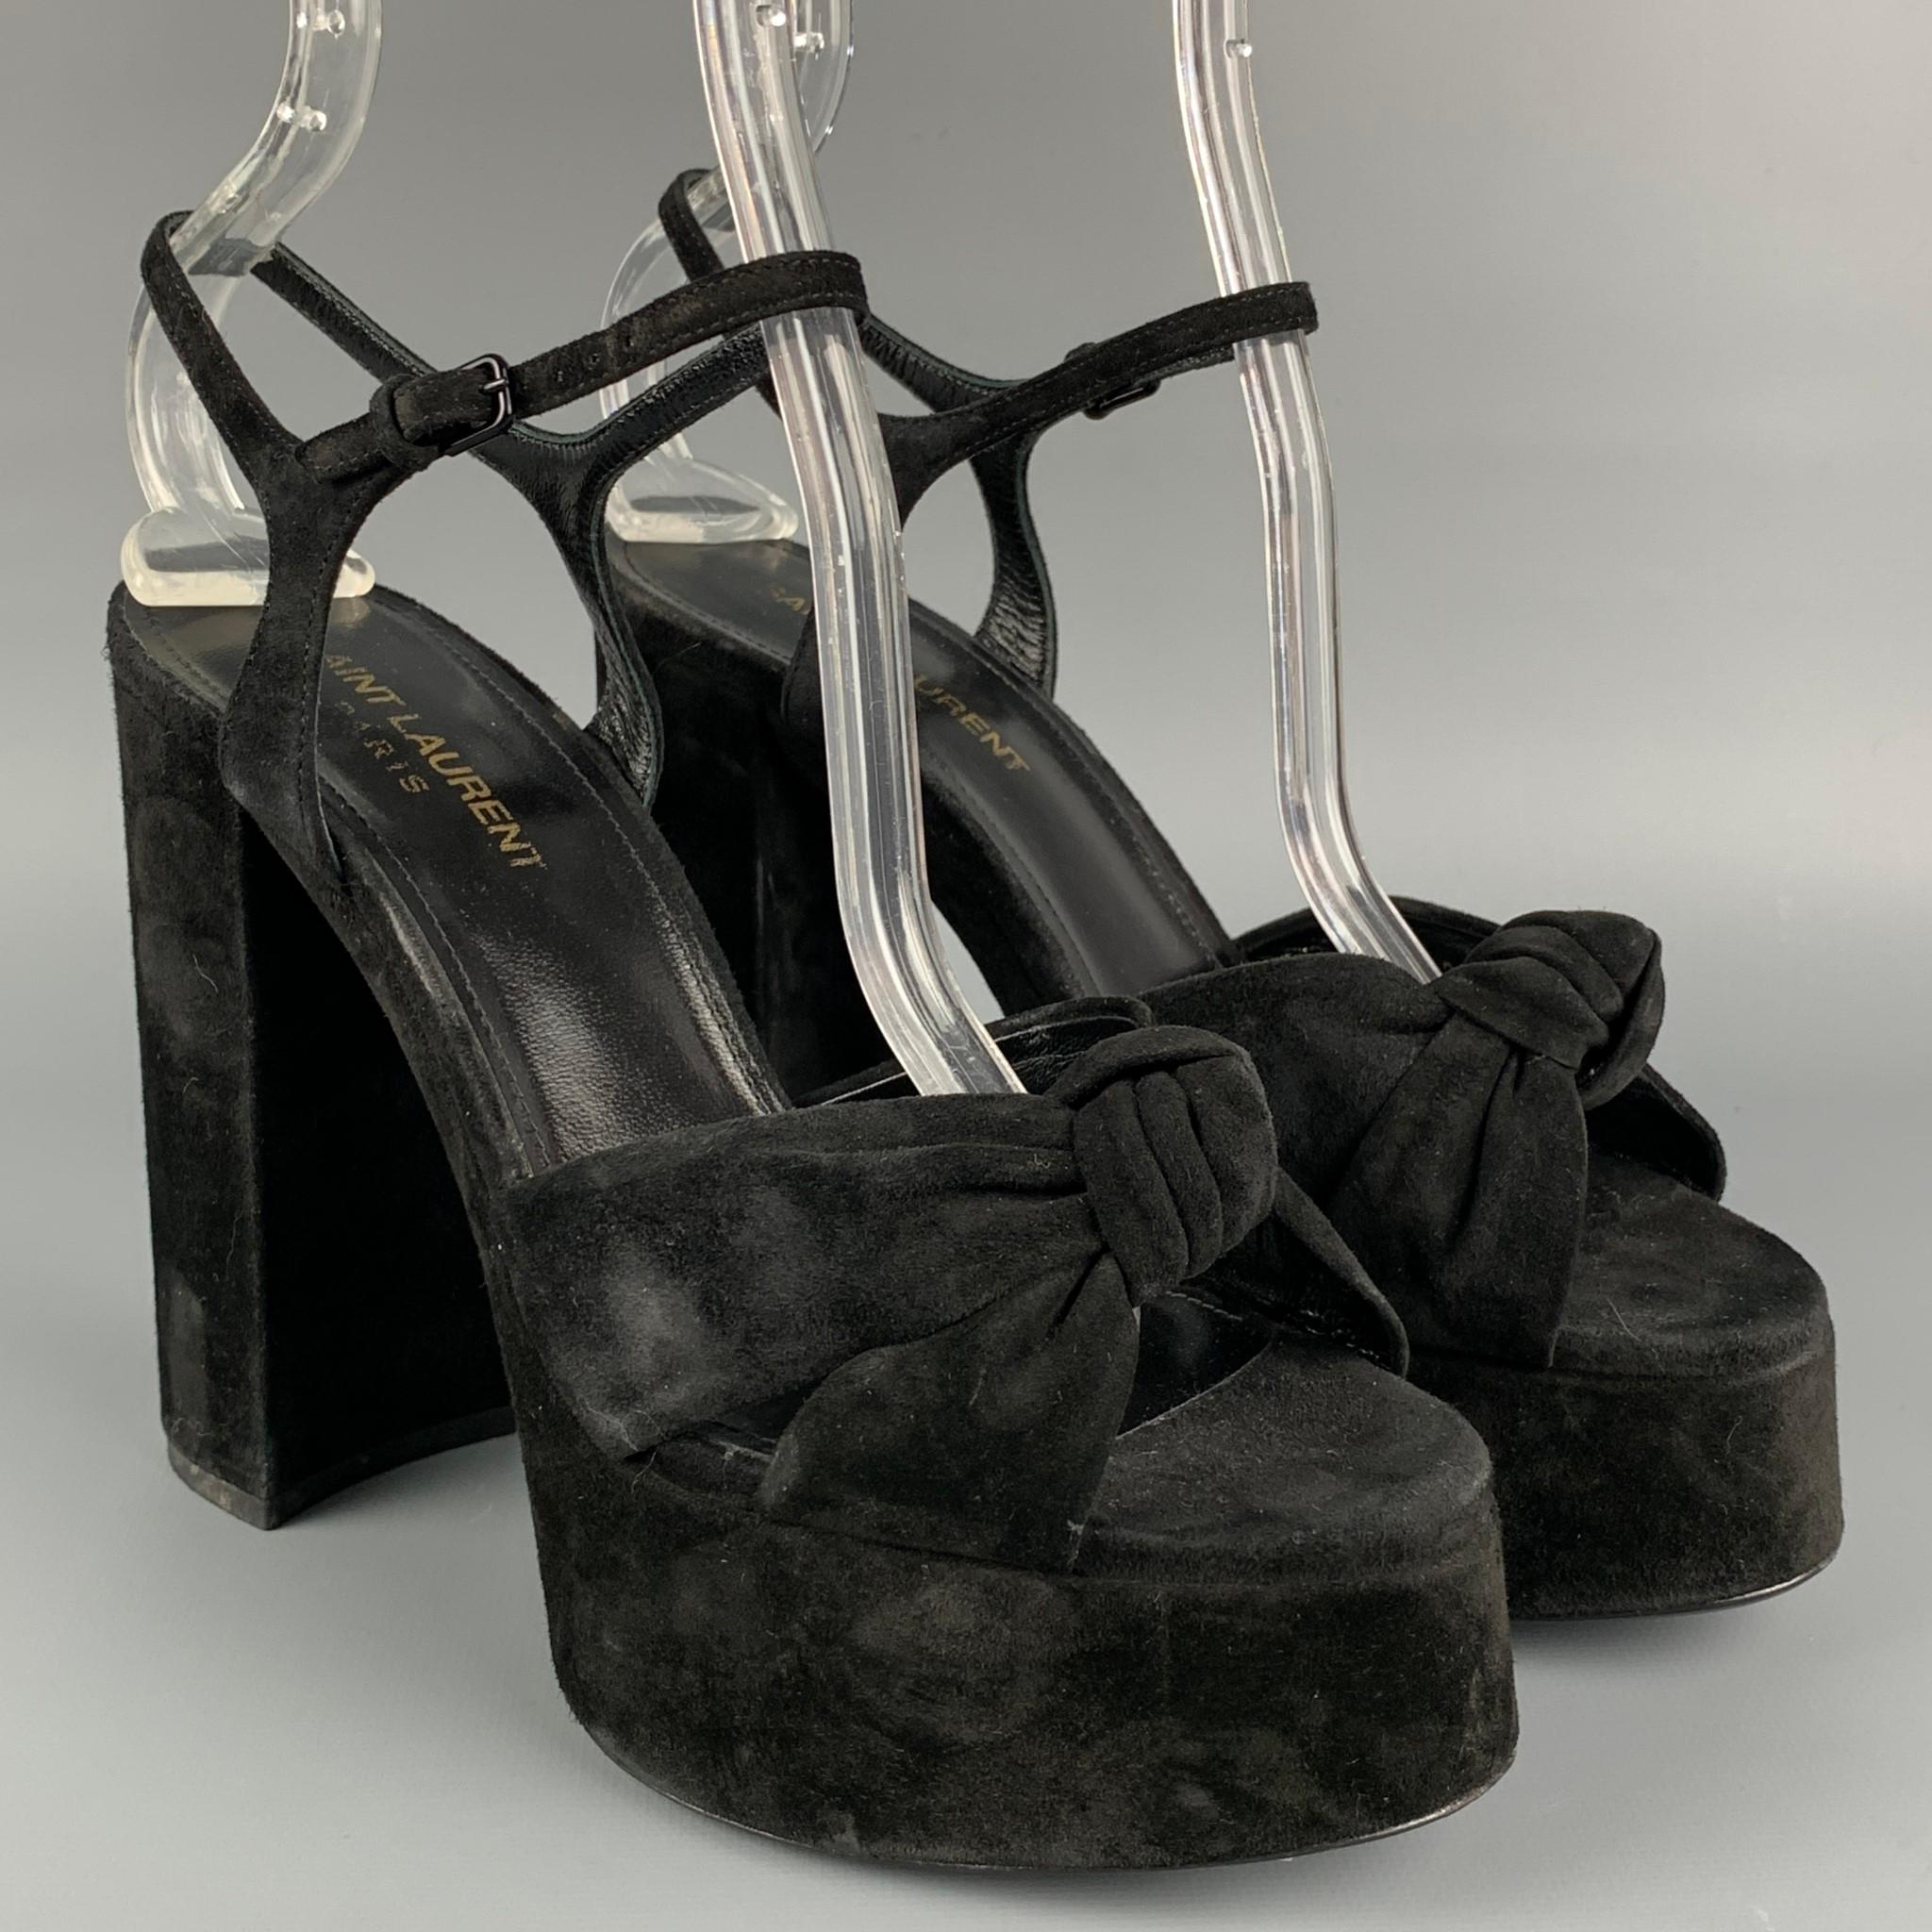 SAINT LAURENT 'Bianca' sandals comes in a black featuring a front knot detail, platform, chunky heel, and a ankle strap closure. Made in Italy. 

Good Pre-Owned Condition.
Marked: 606713 37.5
Original Retail Price: $895.00

Measurements:

Heel: 5